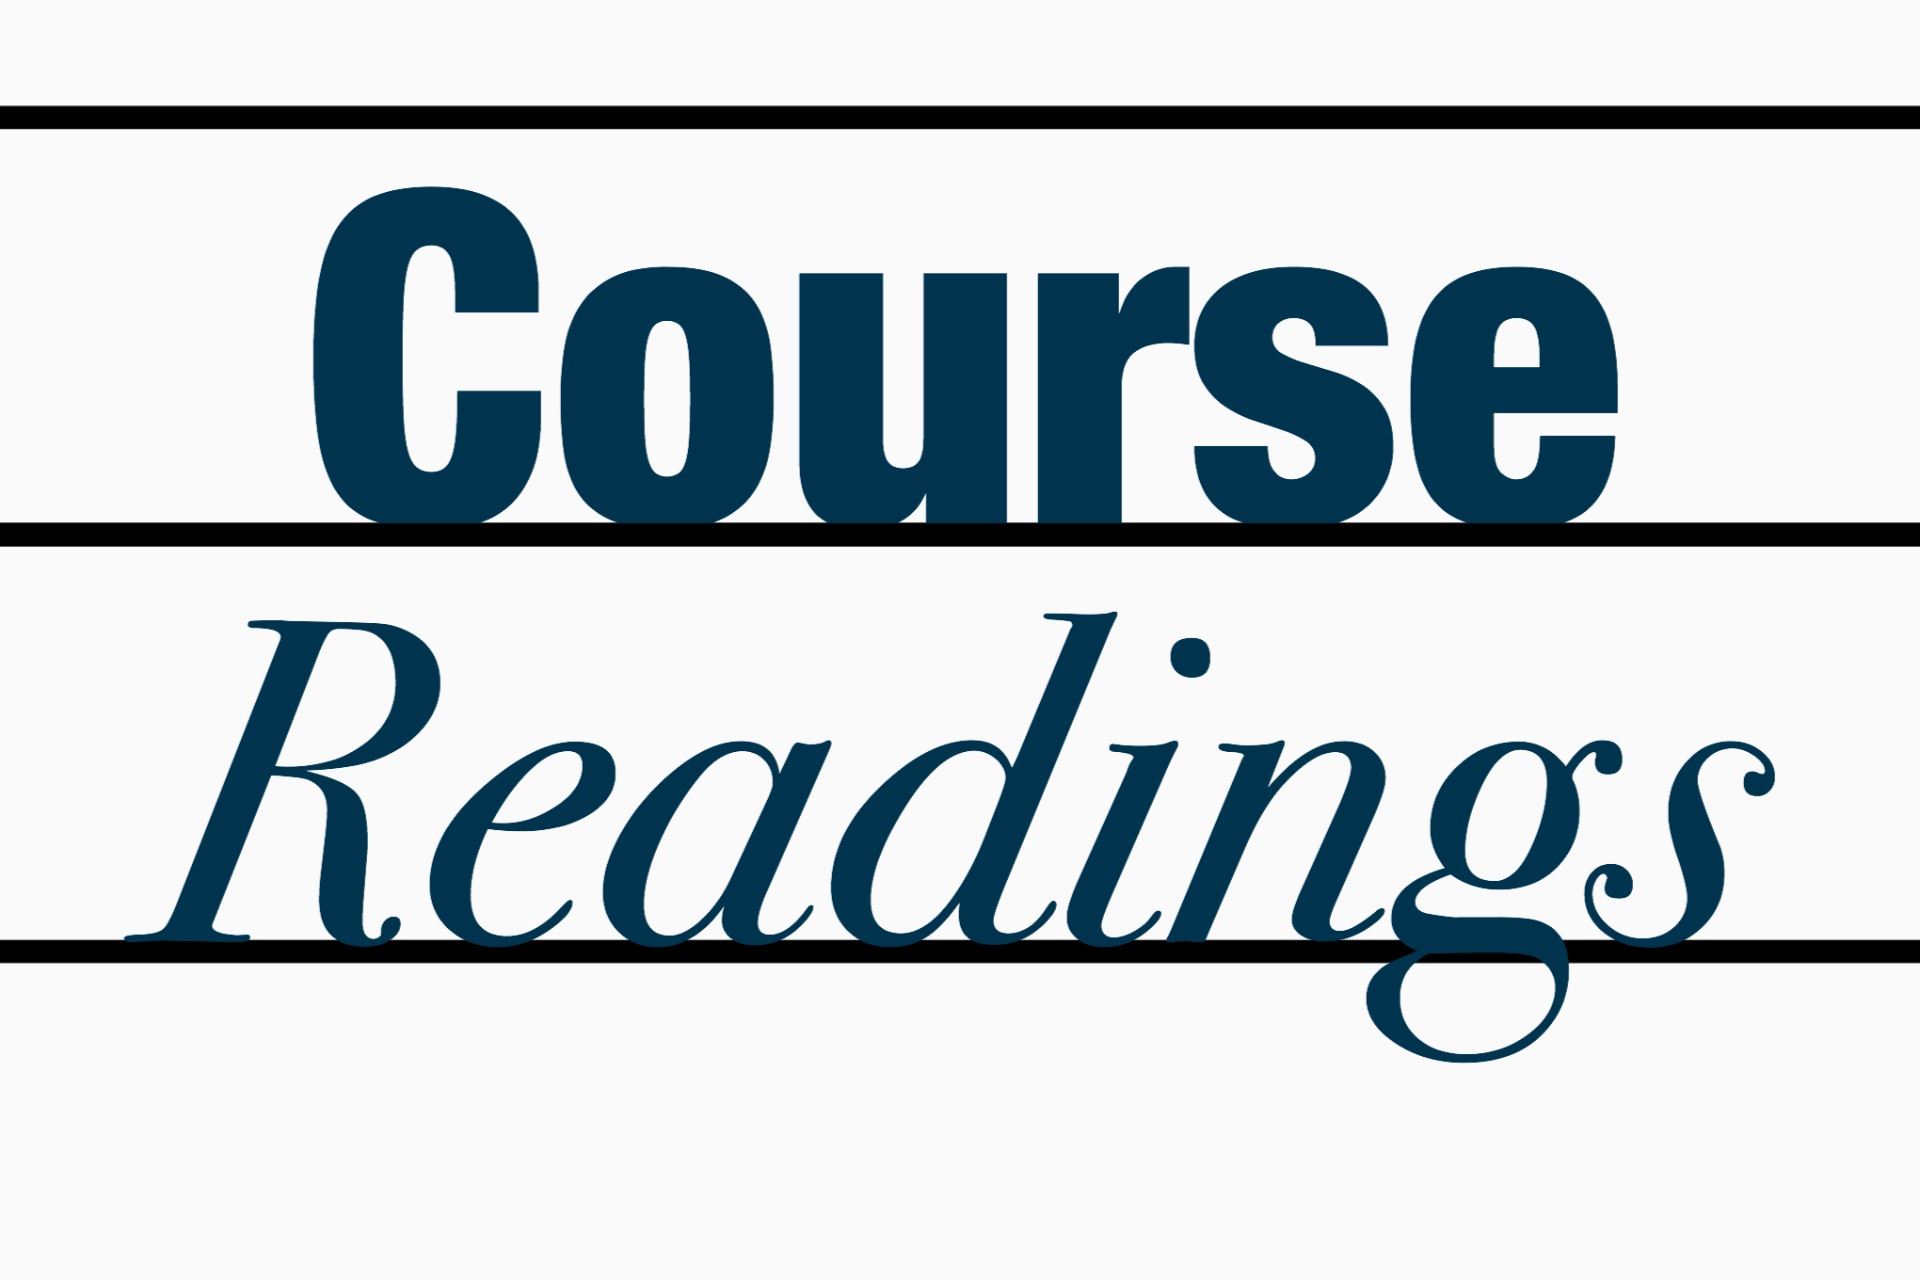 Text which says course readings on a white background